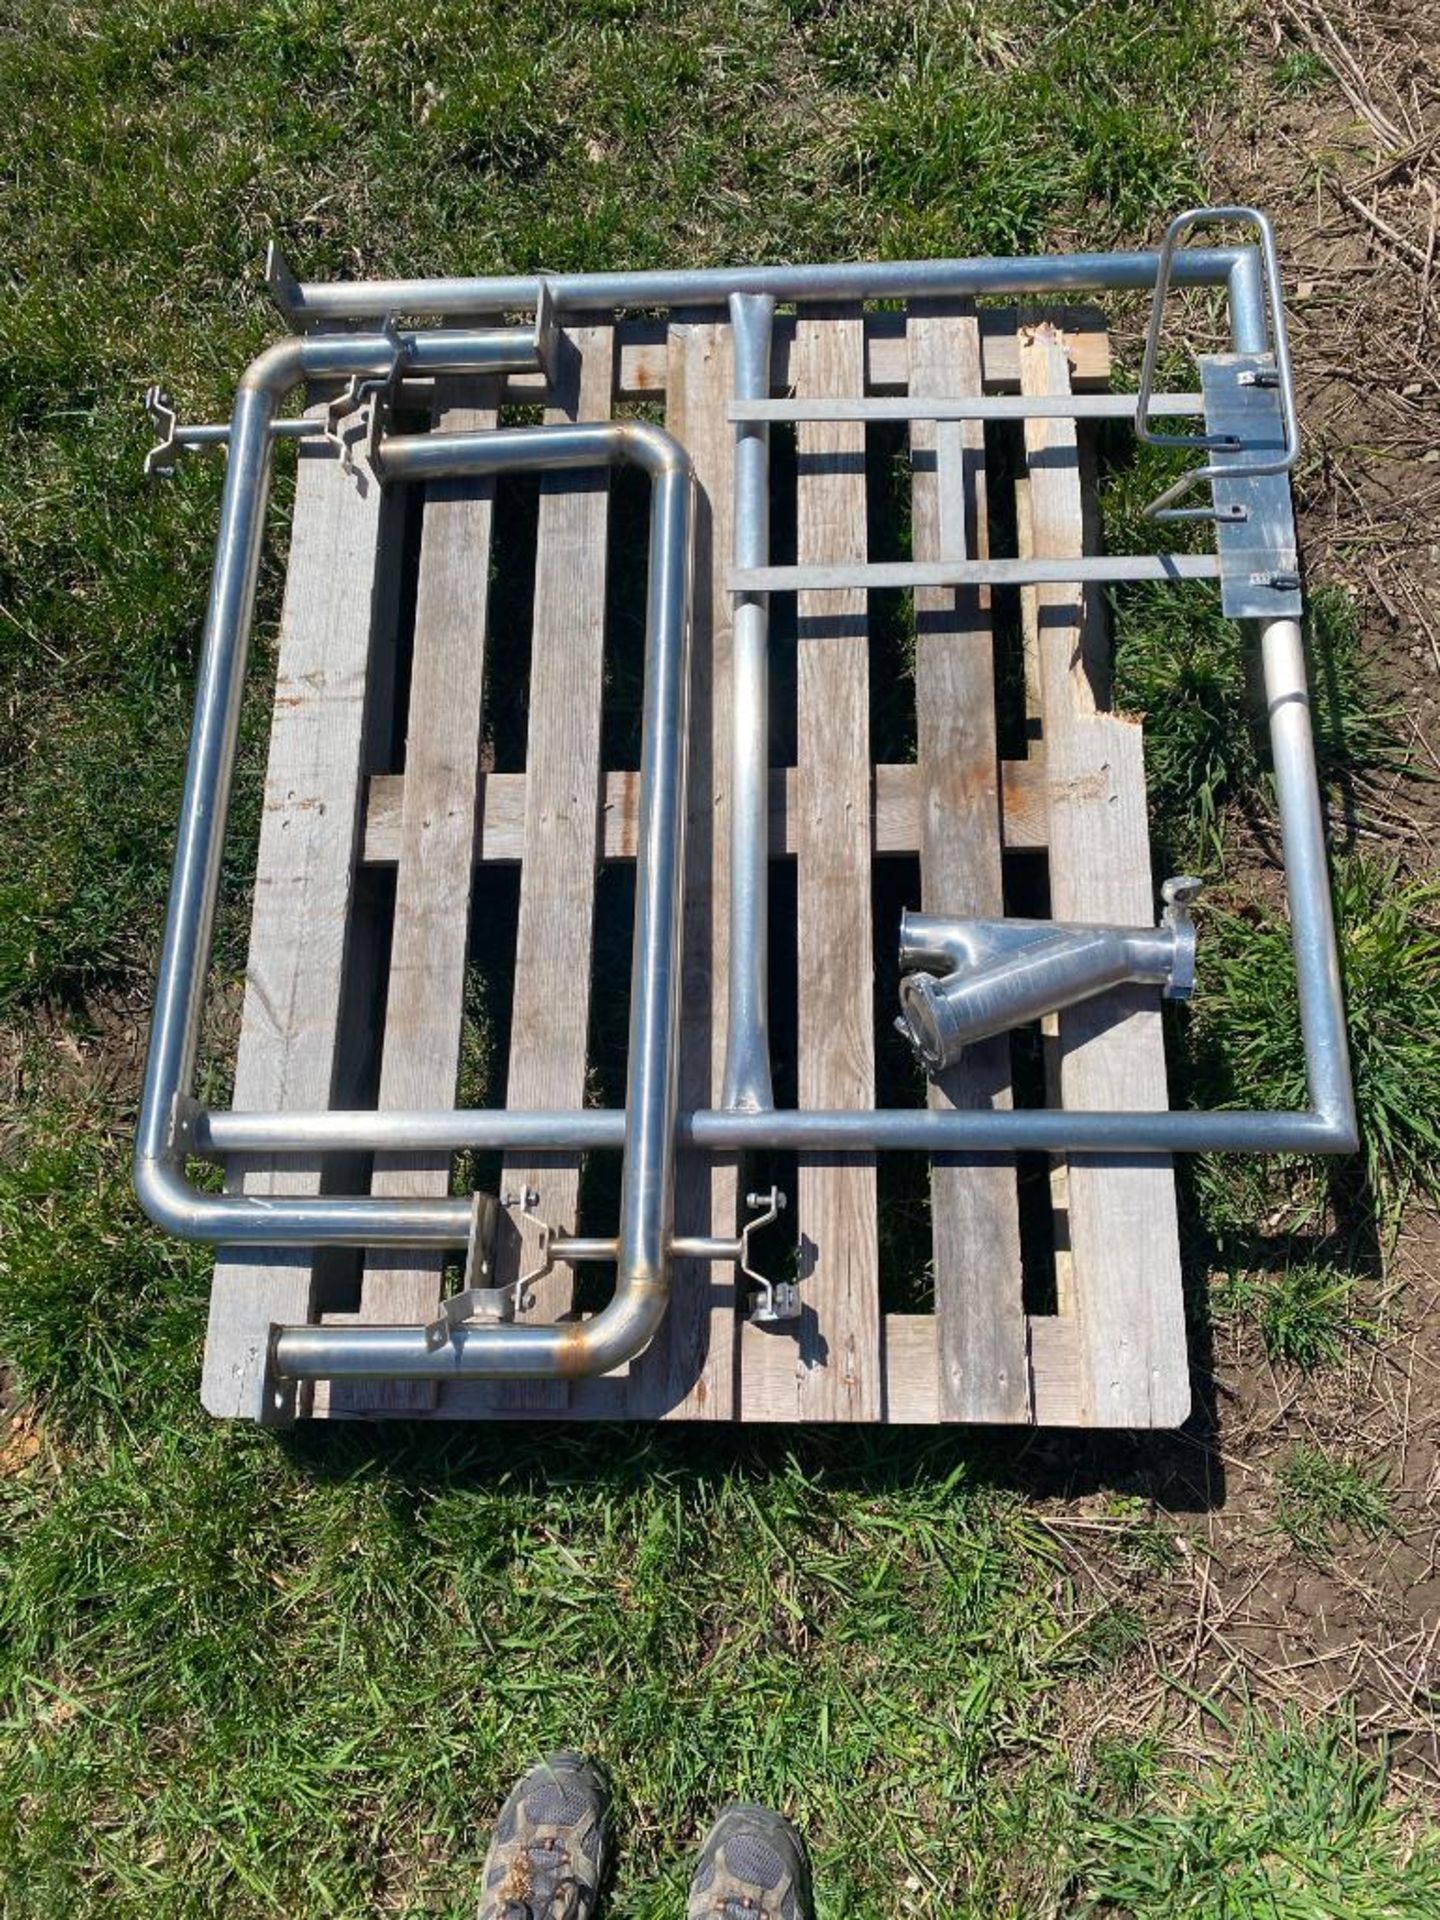 107" x 37" and 38" Handrail Sections, (2) S/S Pump/Motor Bases: 48" x 16" and 38" x 14", (2) Section